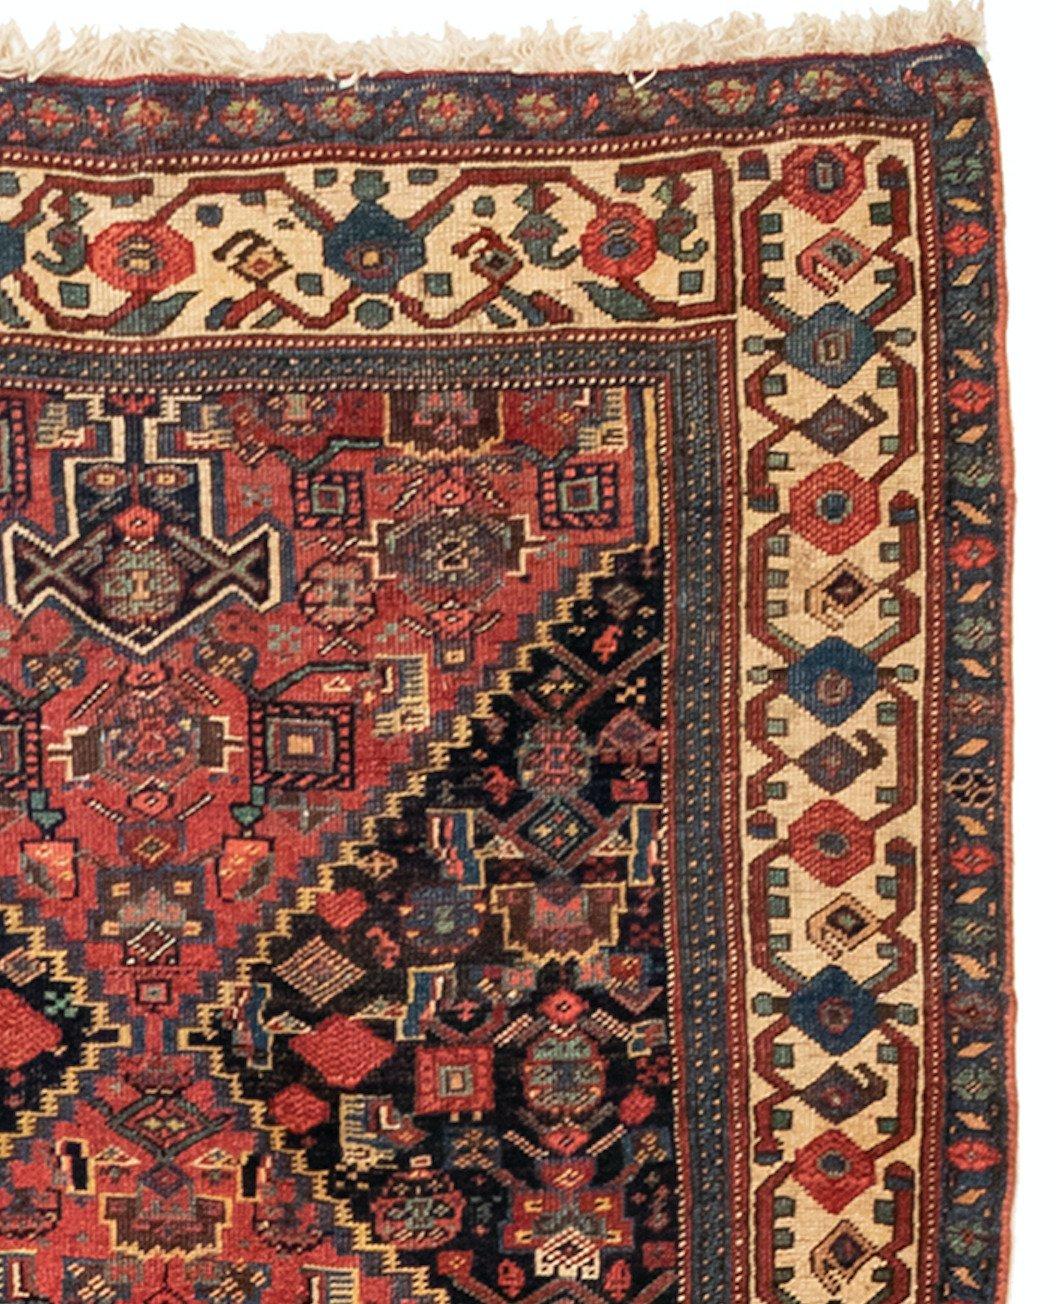 This is a lovely antique navy blue and ivory Persian Bijar rug hand knotted in Iran in the 1900s and measures: 4.6 x 14.7 ft.

Bijar rugs are mainly woven in the town of Bijar and its surrounding villages. Bijar is located in the province of